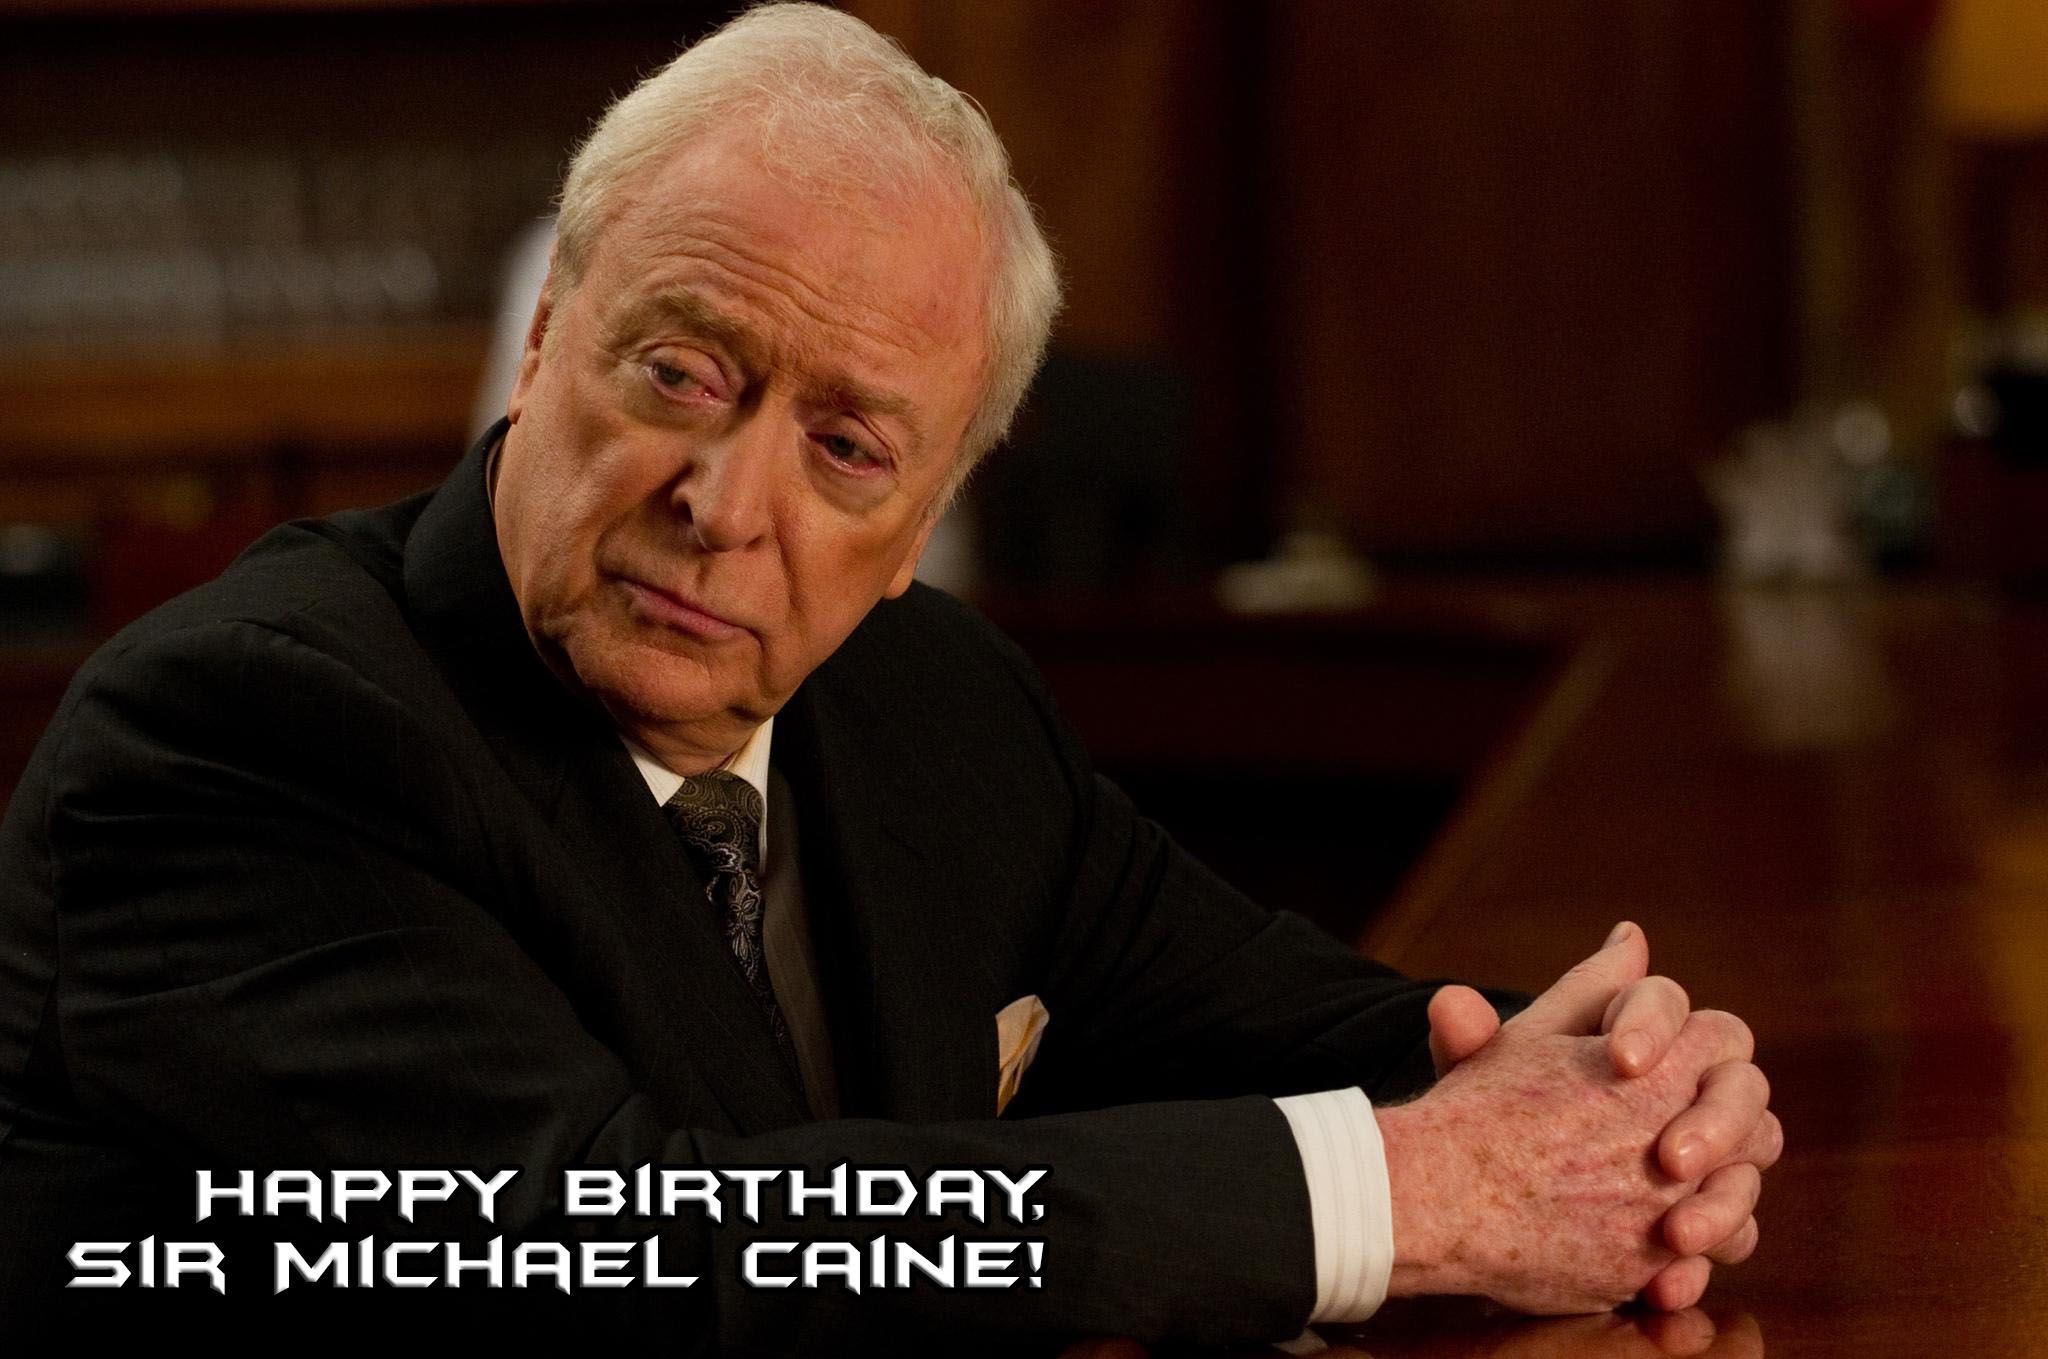 Happy birthday to the legendary, Sir Michael Caine!  